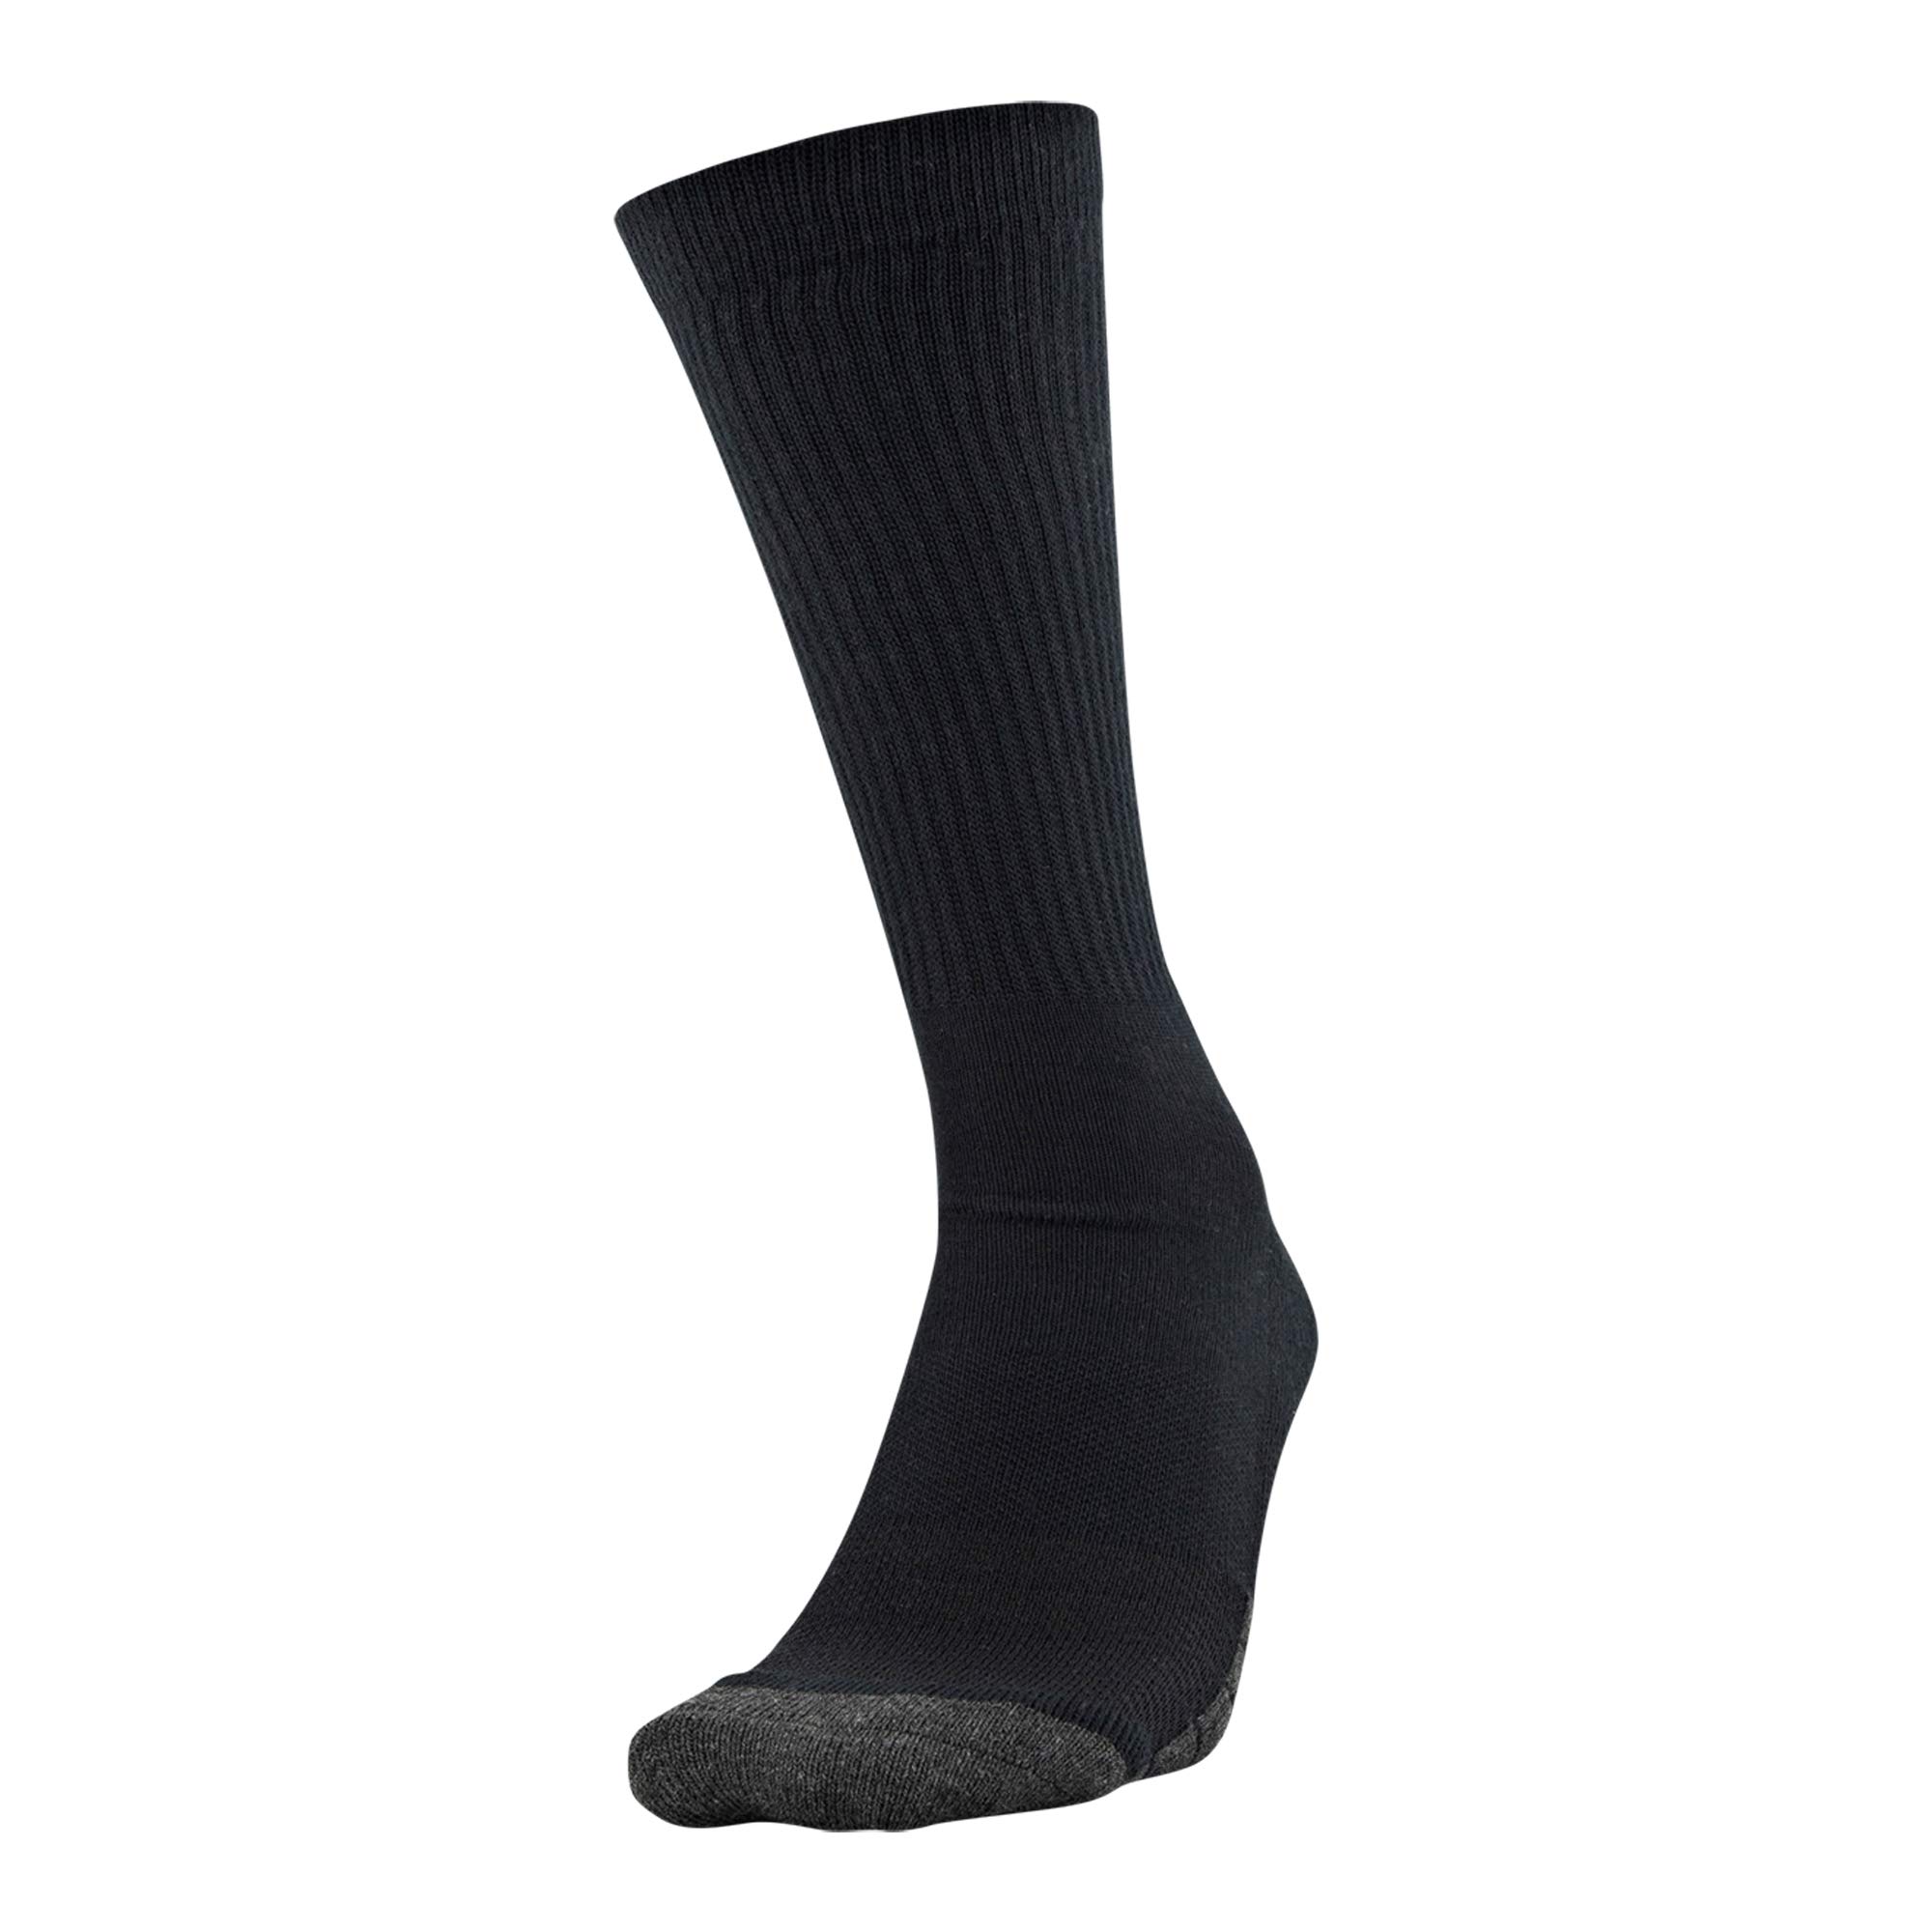 Under Armour Adult Performance Tech Crew Socks, Multipairs